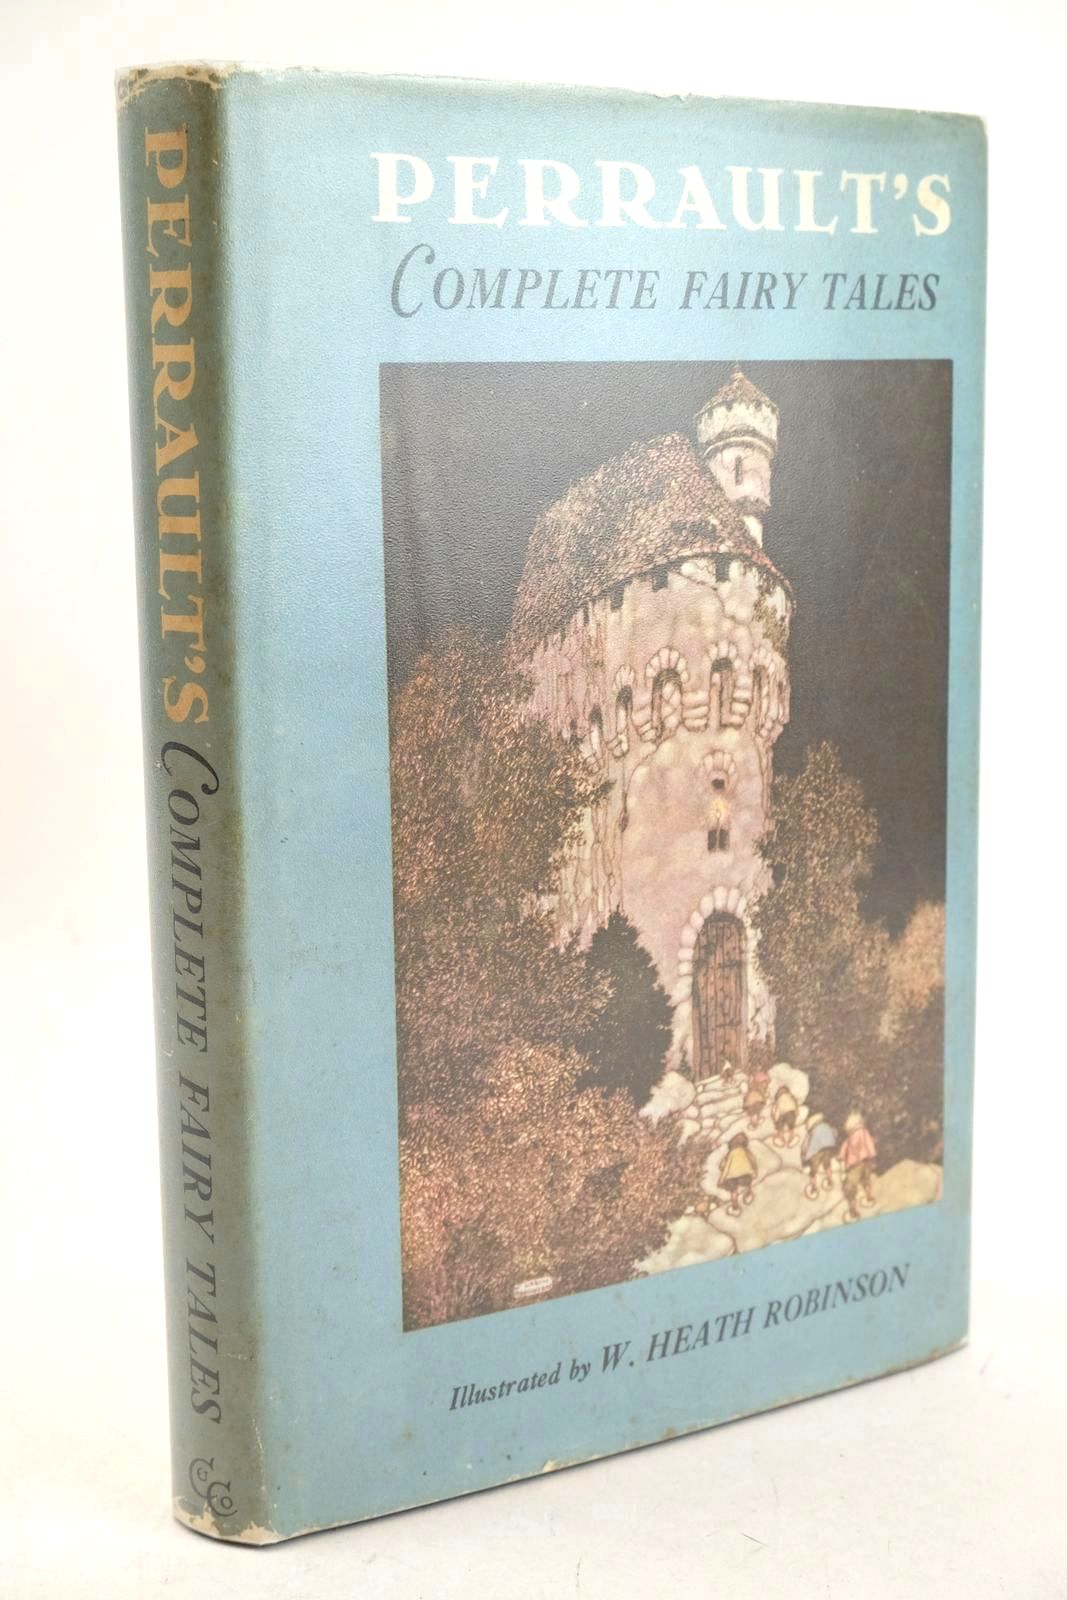 Photo of PERRAULT'S COMPLETE FAIRY TALES written by Perrault, Charles illustrated by Robinson, W. Heath published by Constable &amp; Co. Ltd. (STOCK CODE: 1326732)  for sale by Stella & Rose's Books